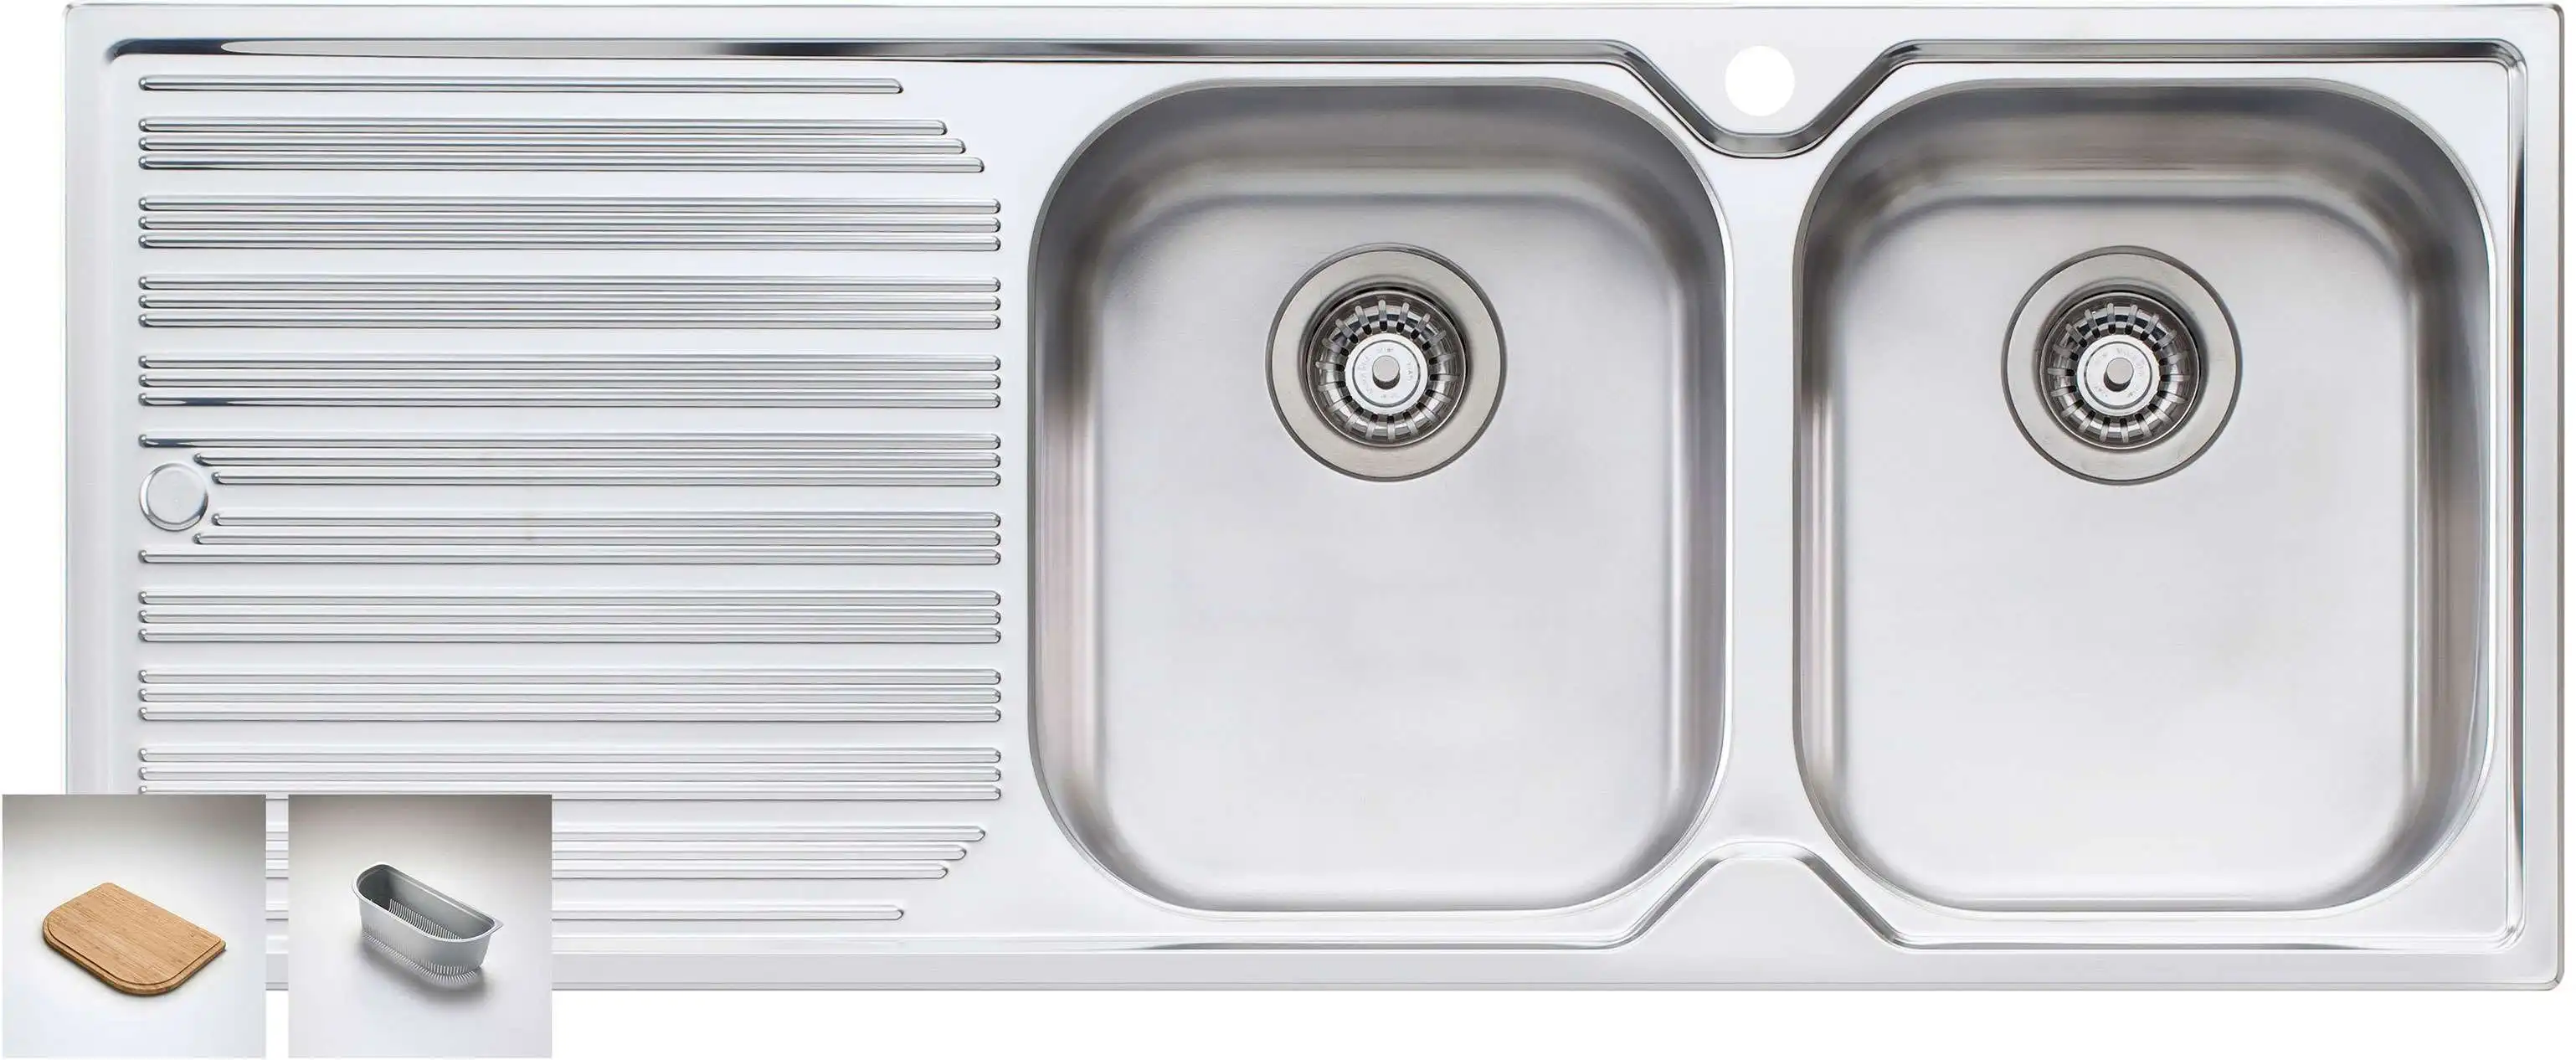 Oliveri Diaz Double Right Hand Bowl Inset Sink With Drainer DZ172